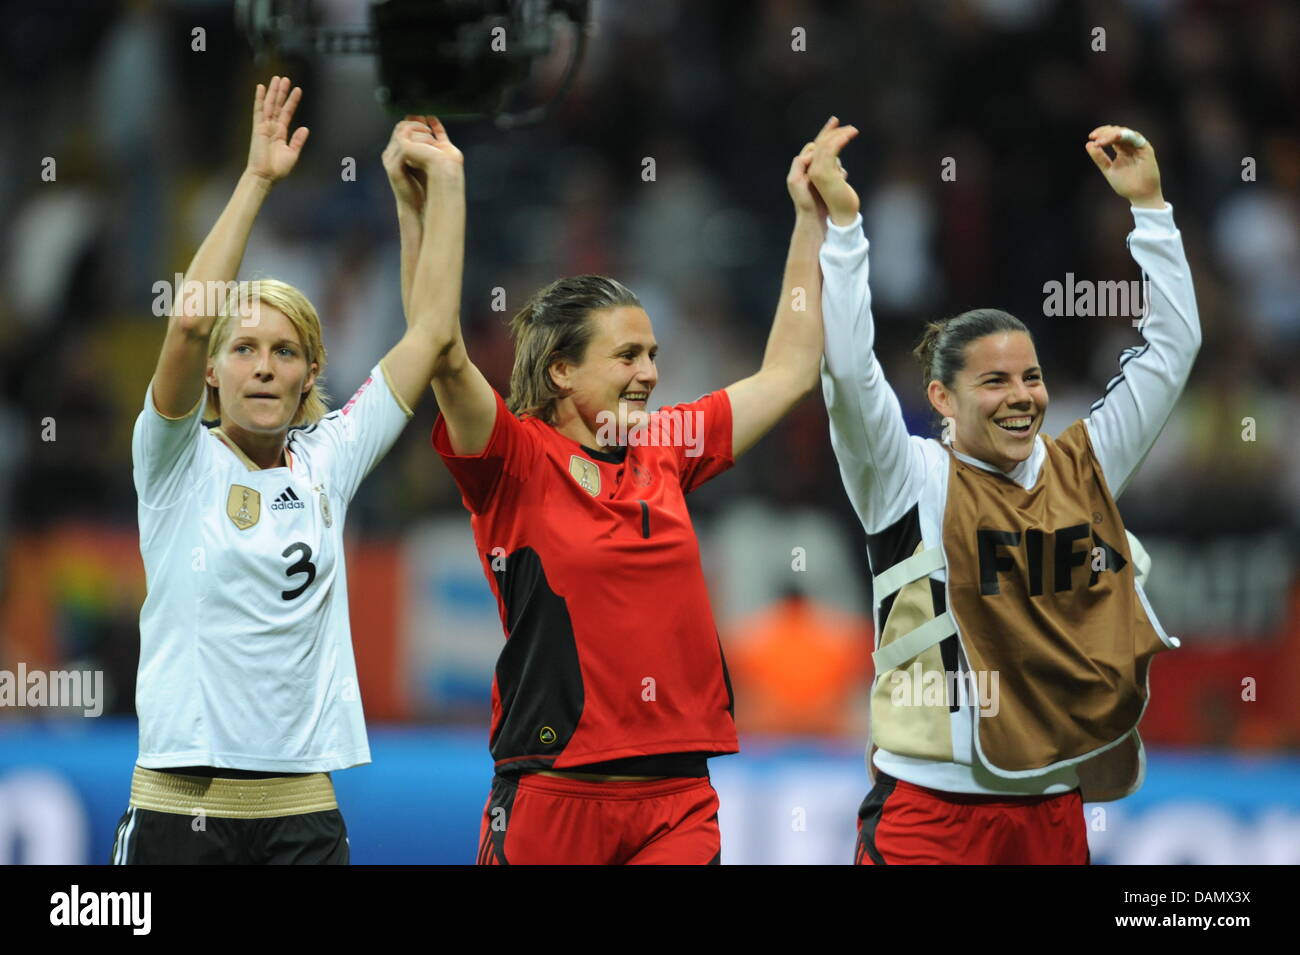 Germany's Saskia Bartusiak (L-R), goalkeeper Nadine Angerer and Ursula Holl celebrate after the Group A match Germany against Nigeria of FIFA Women's World Cup soccer tournament at the FIFA Women's World Cup Stadium in Frankfurt, Germany, 30 June 2011. Foto: Arne Dedert dpa/lhe  +++(c) dpa - Bildfunk+++ Stock Photo